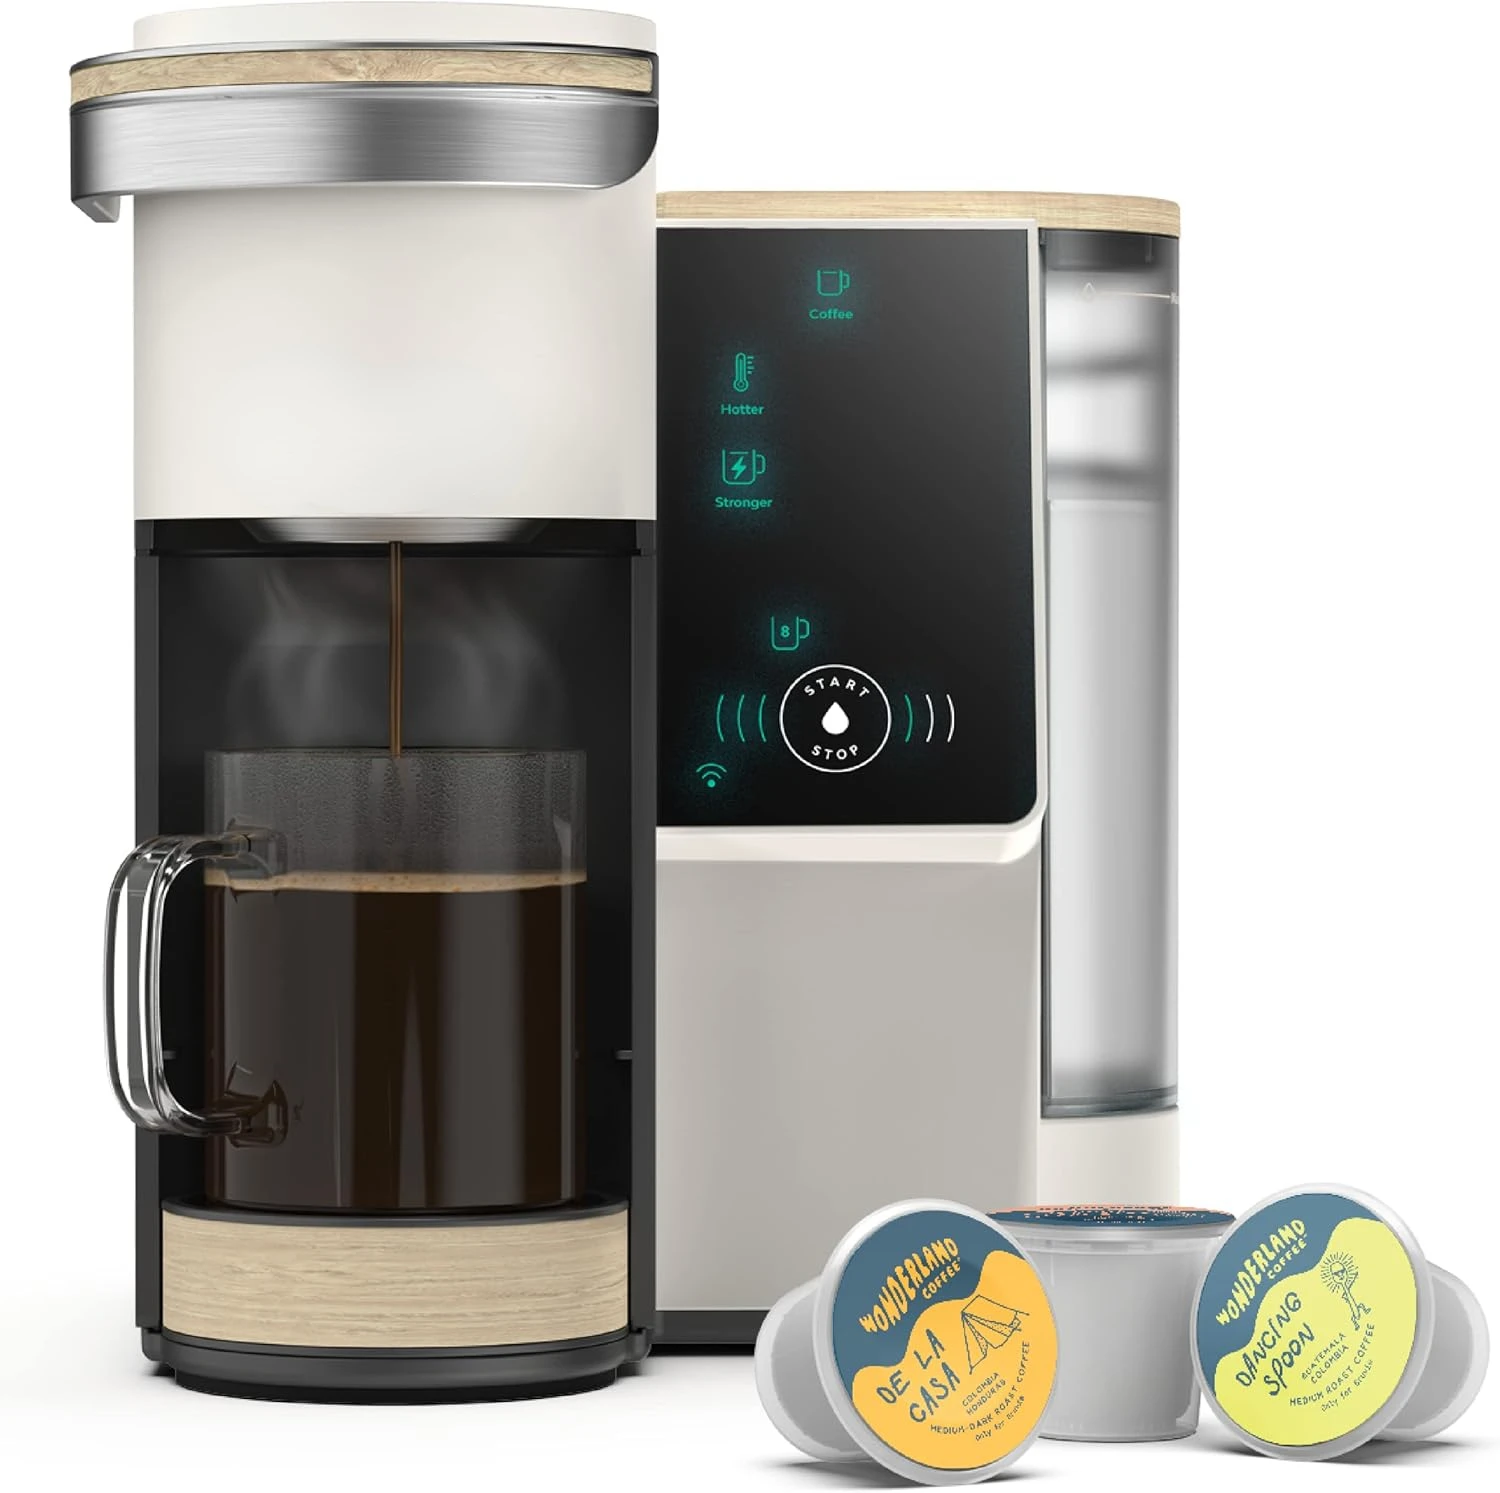 

Bundle | Single-Serve Coffee System | Includes 20 Coffee and Espresso B-Pods + Coffee Brewer + Premium Water Filter Kit Falafel